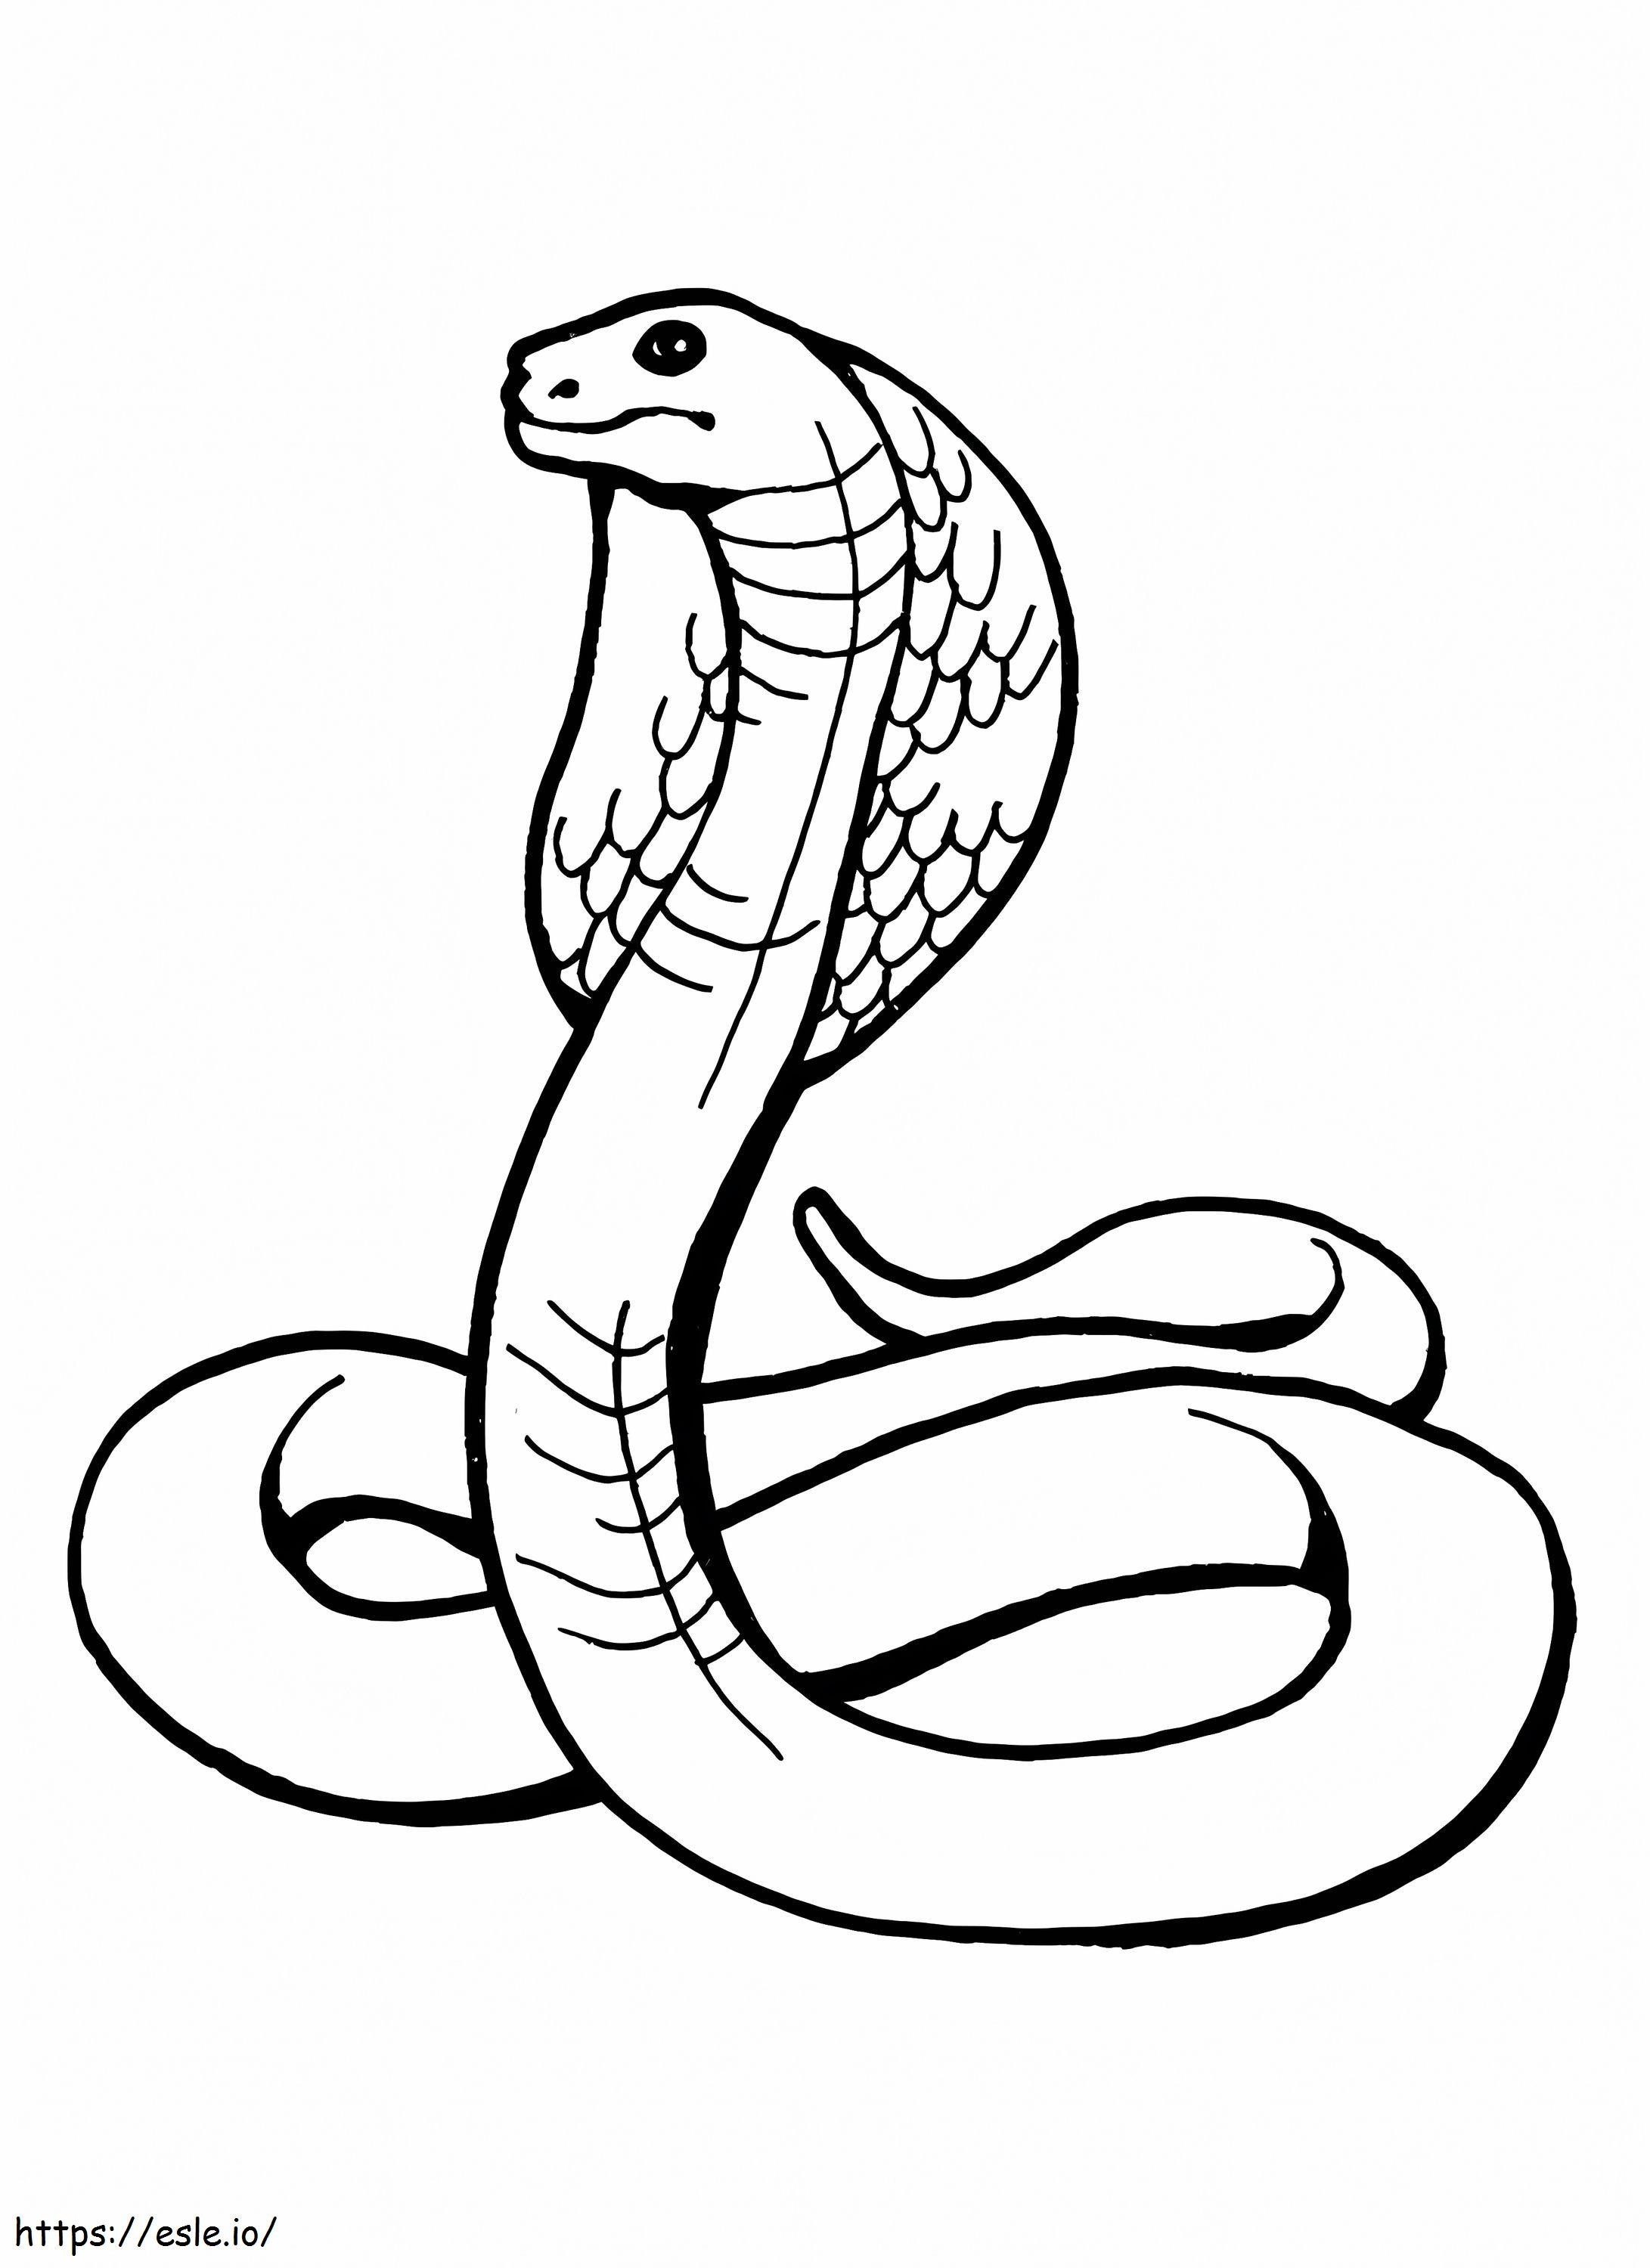 Cool Cobra coloring page